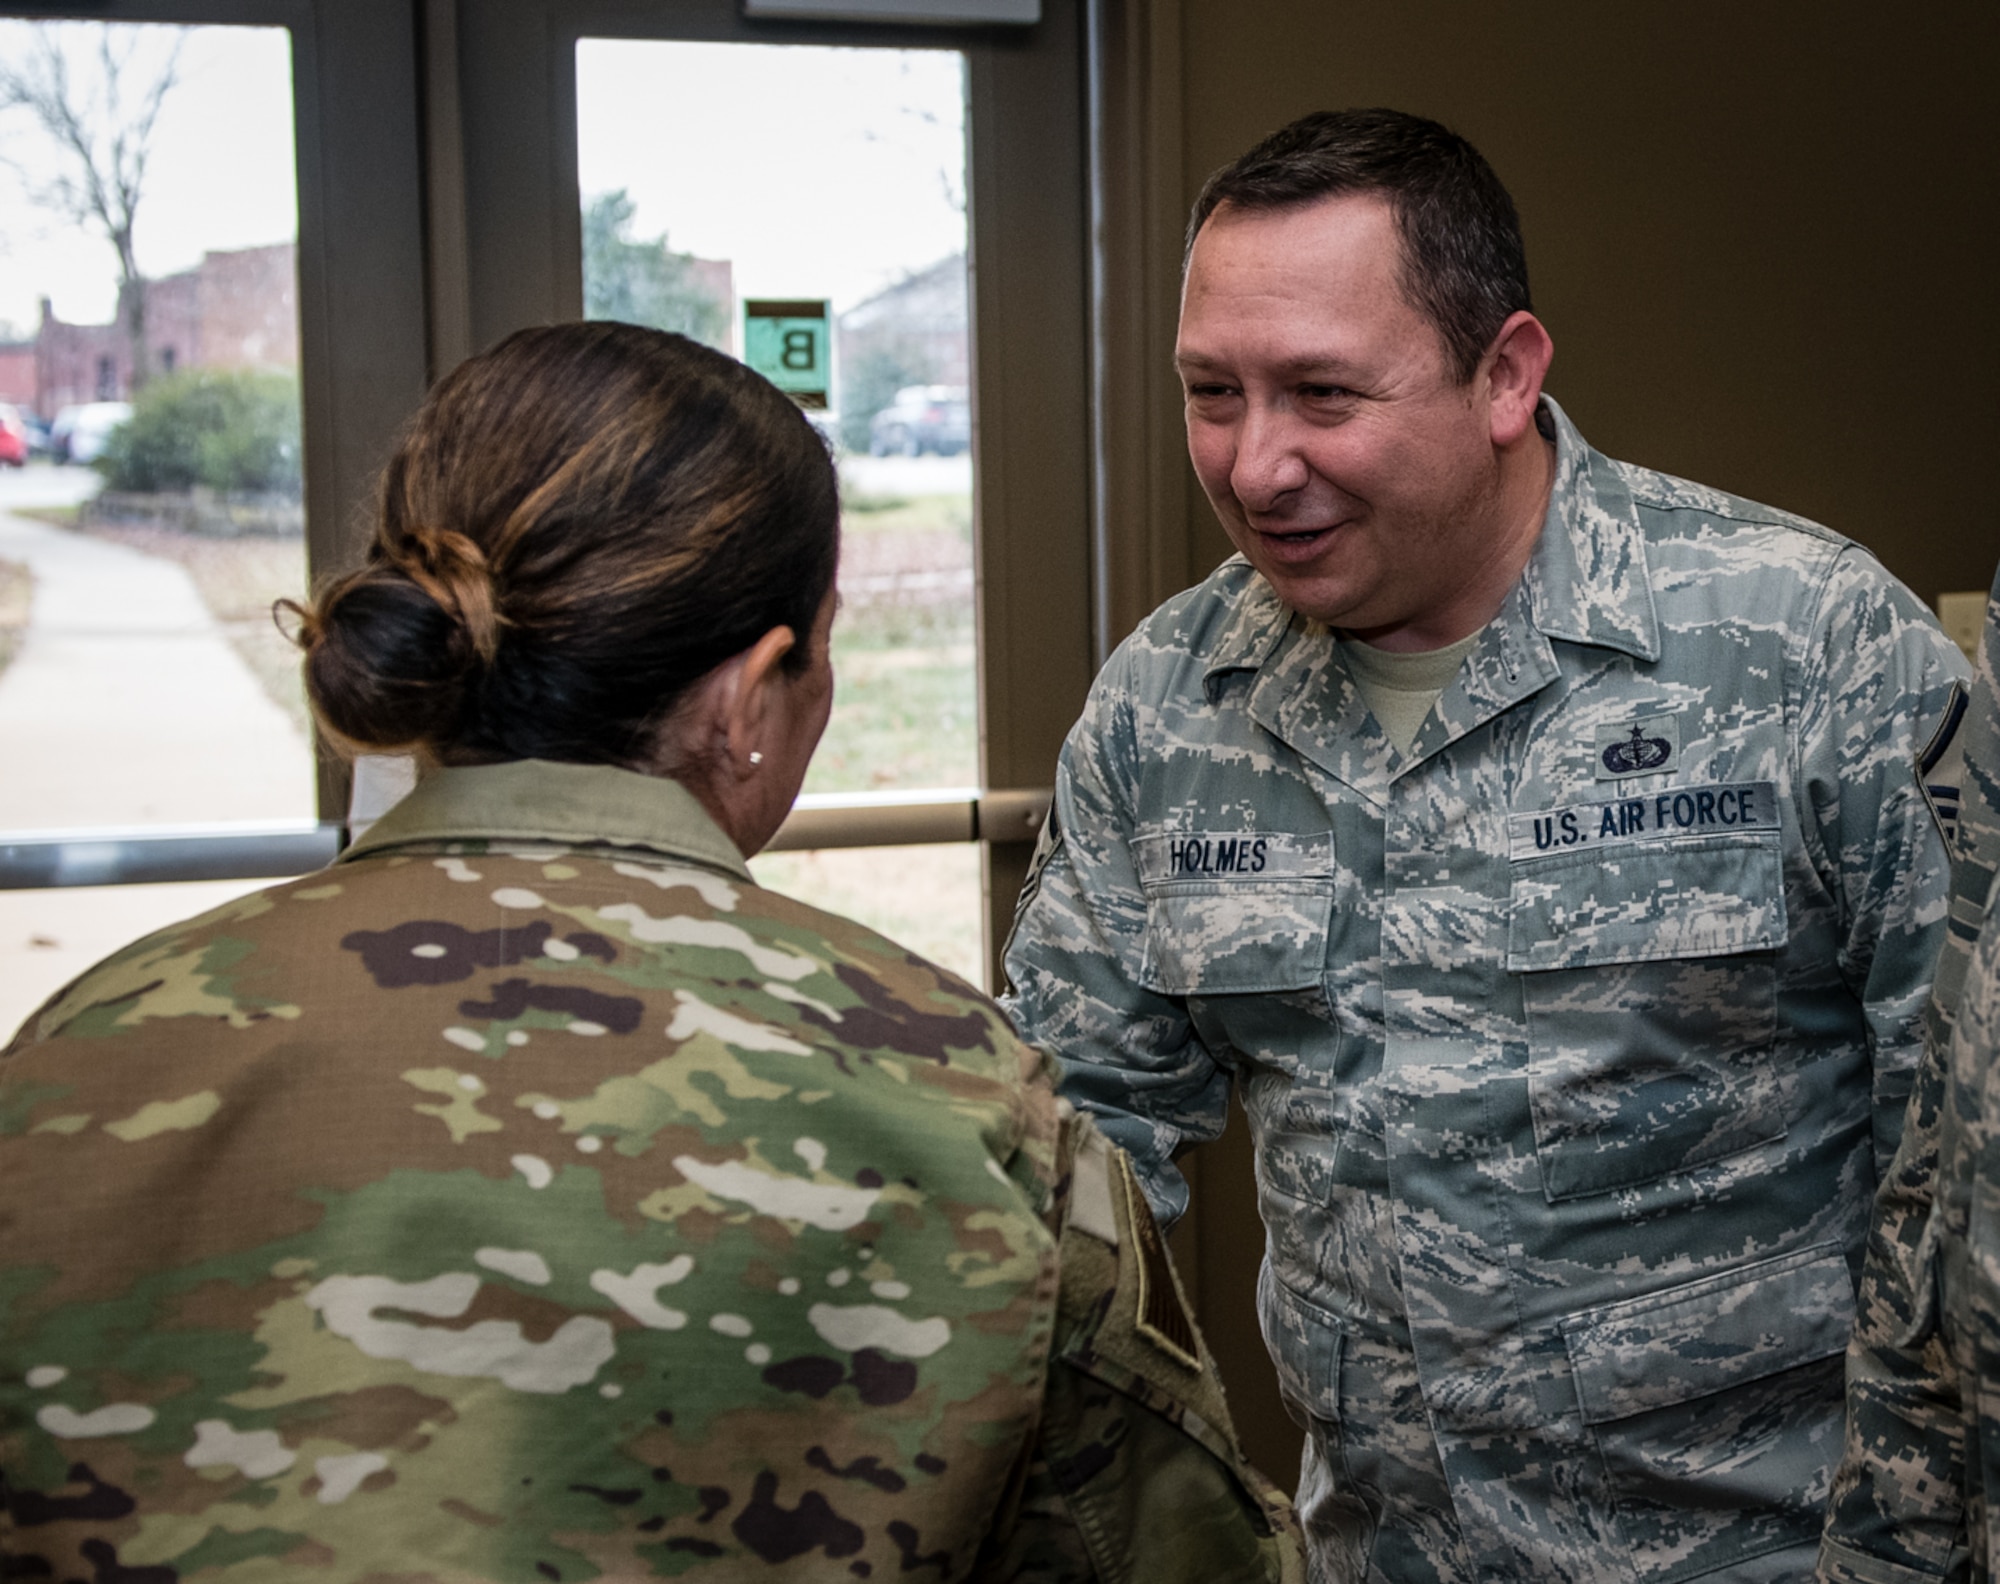 Retiring 932nd Force Support Squadron member, Master Sgt. Jeffery Holmes, is presented a coin by 932nd Command Chief Barbara Gilmore, Nov. 16, 2019, Scott Air Force Base, Illinois. Holmes looks forward to more time and birthdays with family and friends.  (U.S. Air Force photo by Master Sgt. Christopher Parr)